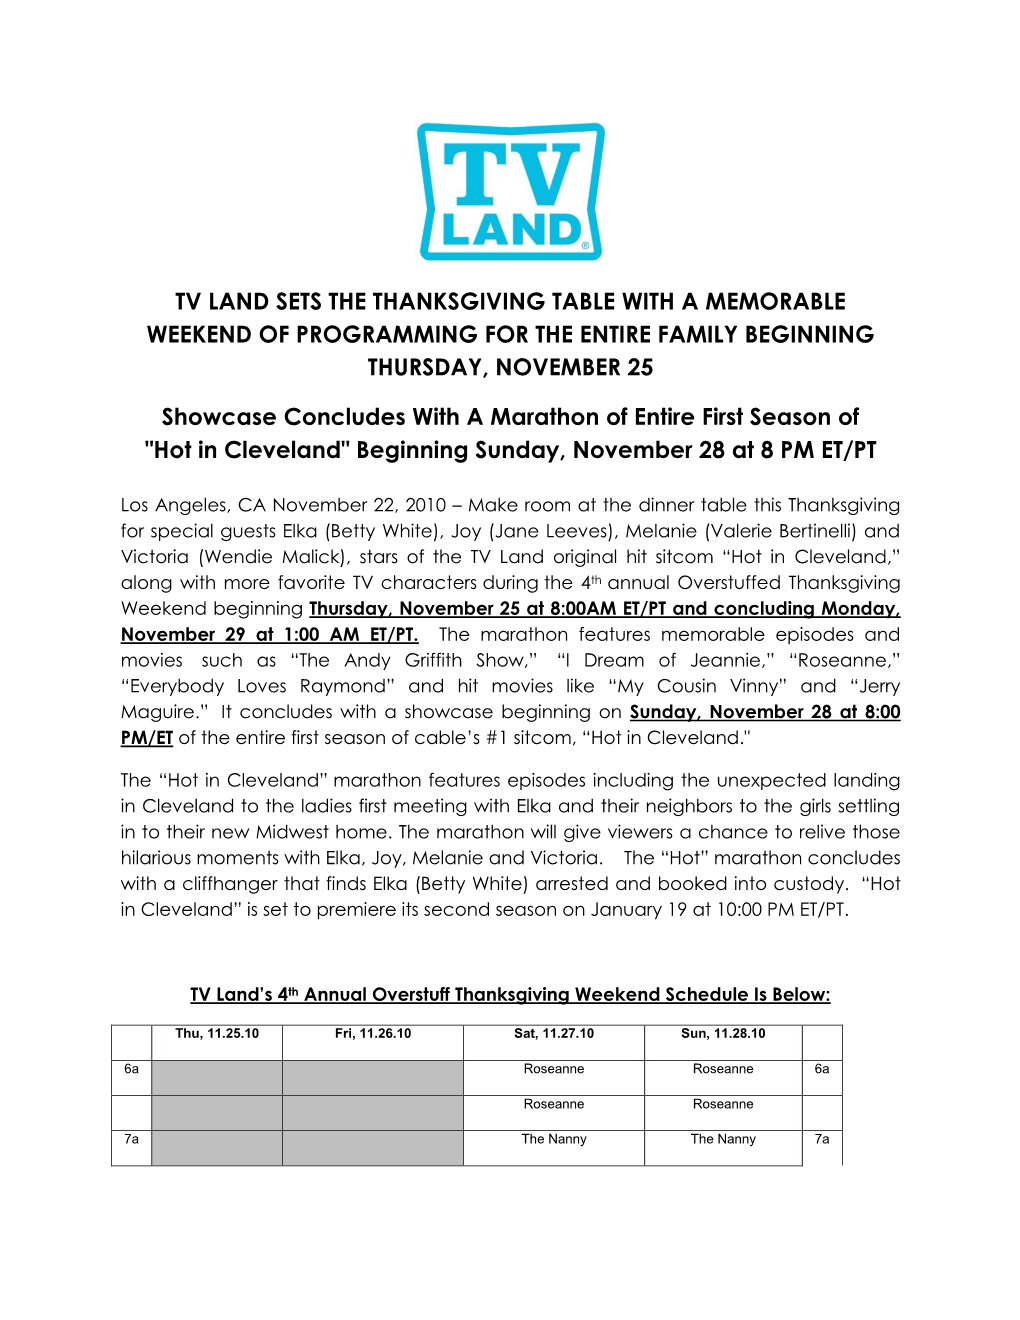 Tv Land Sets the Thanksgiving Table with a Memorable Weekend of Programming for the Entire Family Beginning Thursday, November 25